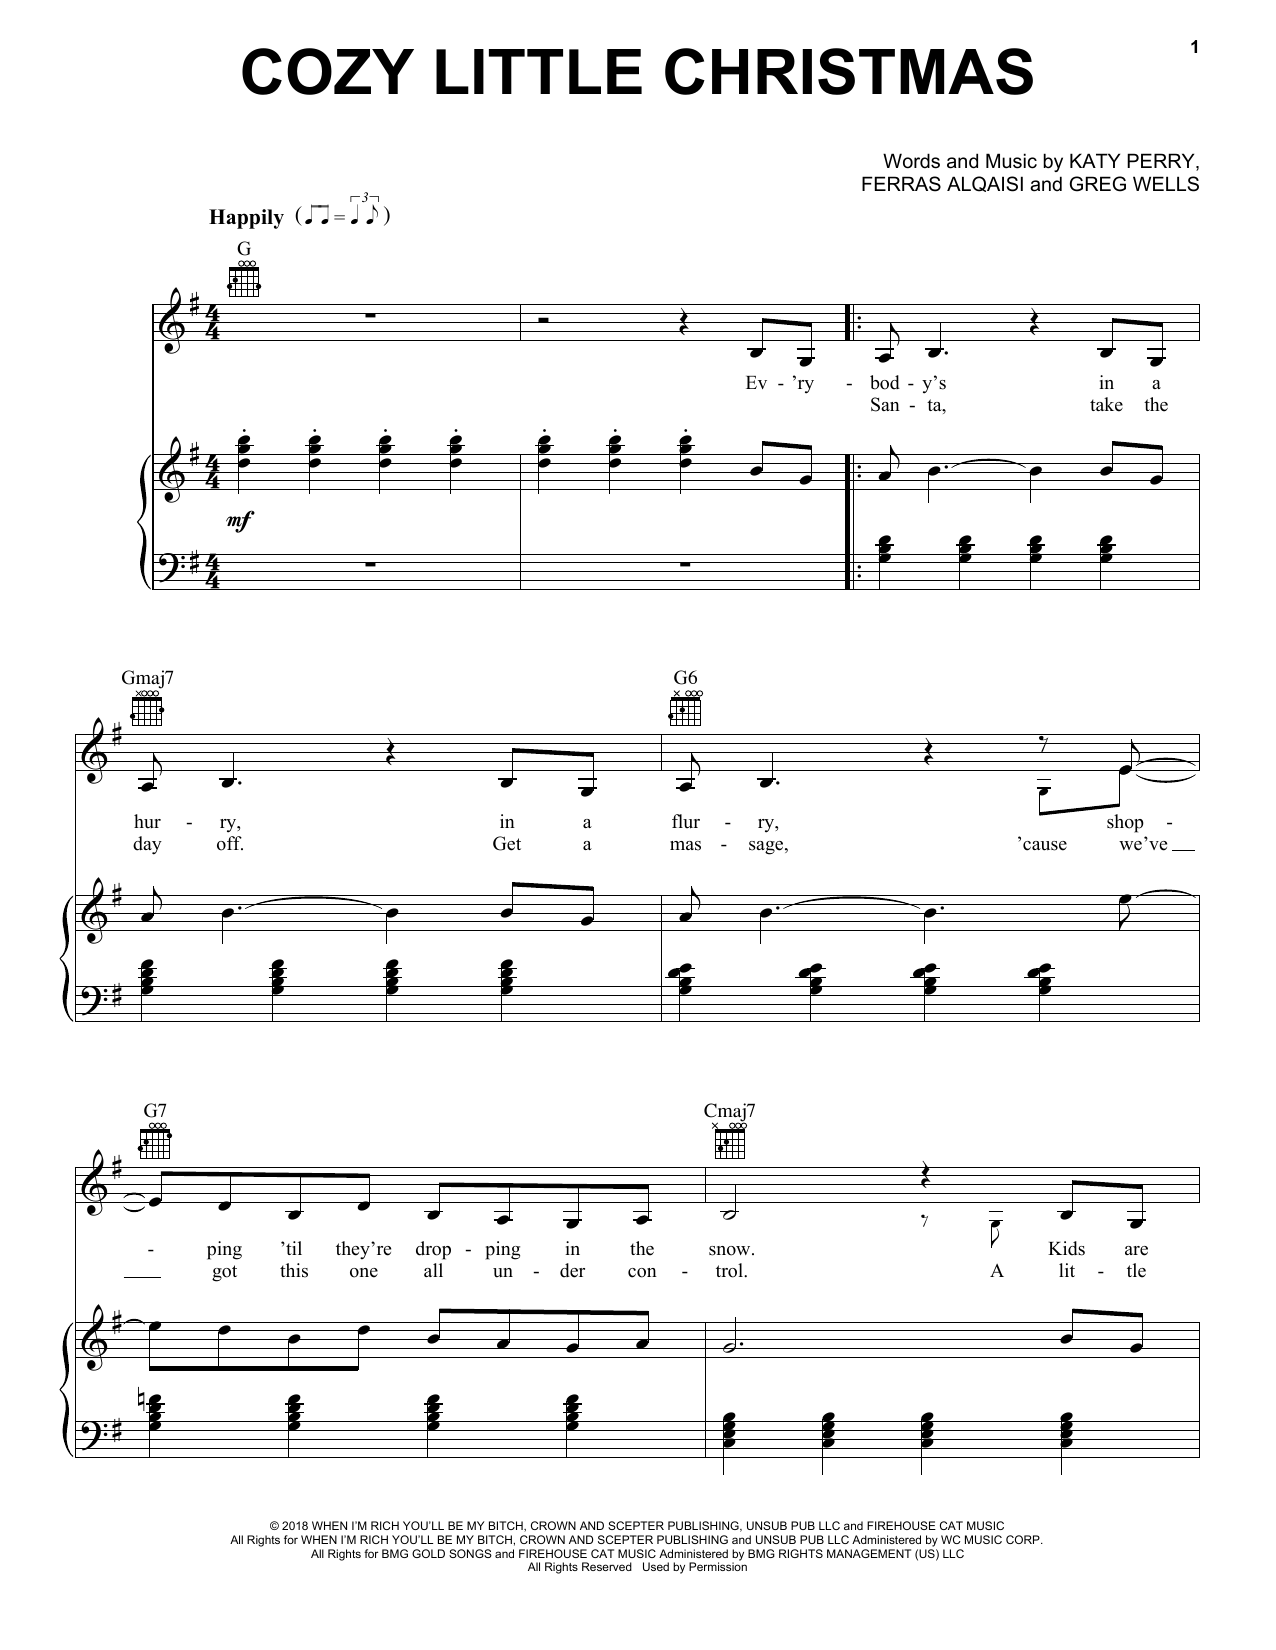 Download Katy Perry Cozy Little Christmas Sheet Music